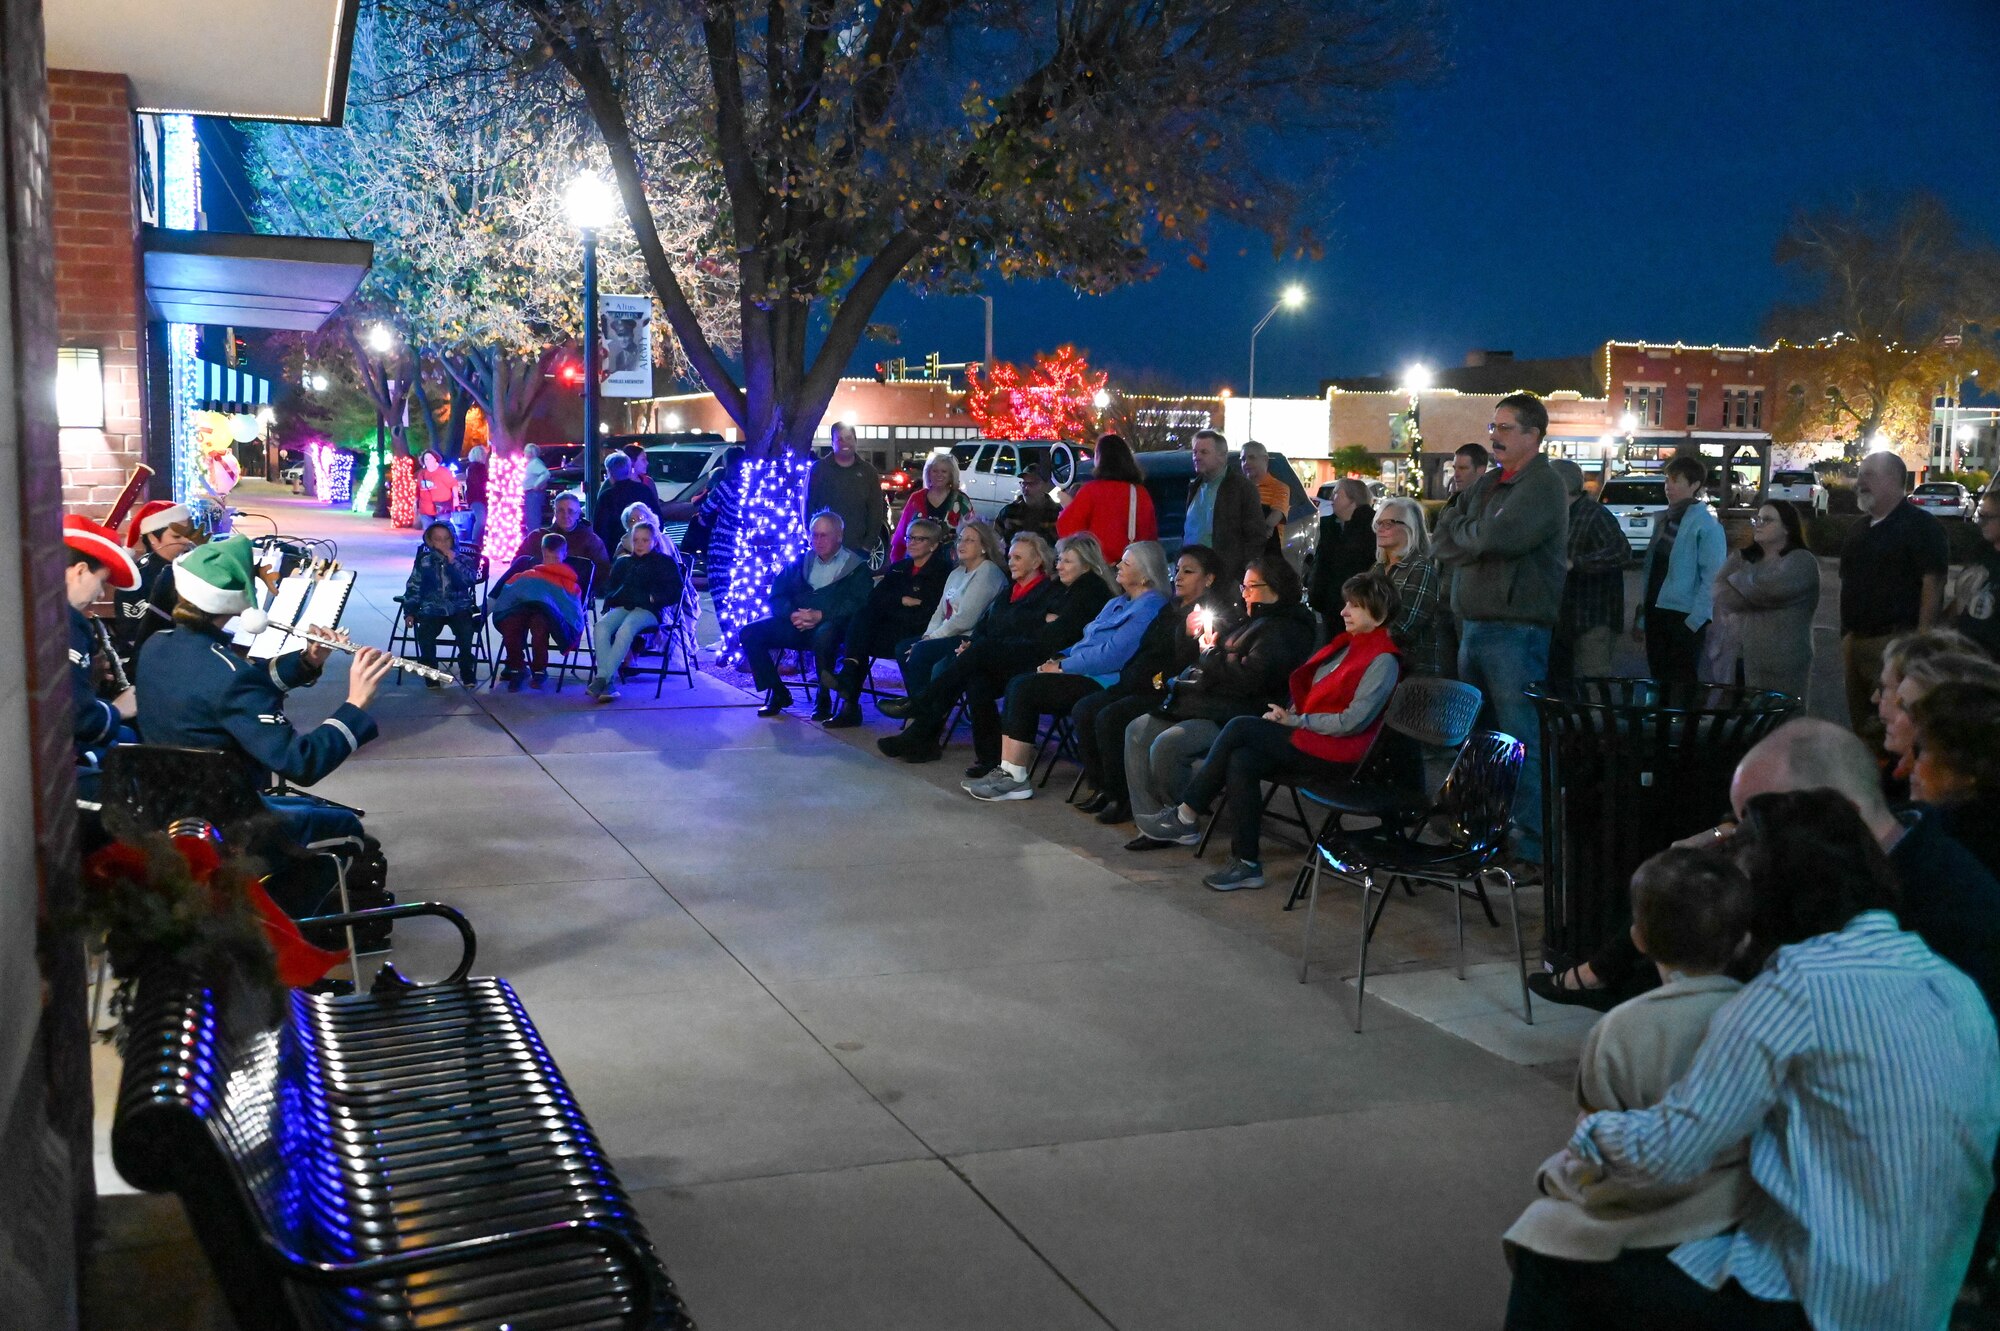 The U.S. Air Force Band of the West plays at the Altus Town Square, Oklahoma, Dec. 14, 2021. One of the USAF Band of the West’s objectives is to increase public understanding of the importance of airpower, the mission, policies, and programs of the Air Force and the bravery, sacrifice and dedication of Airmen. (U.S. Air Force photo by Airman 1st Class Kayla Christenson)